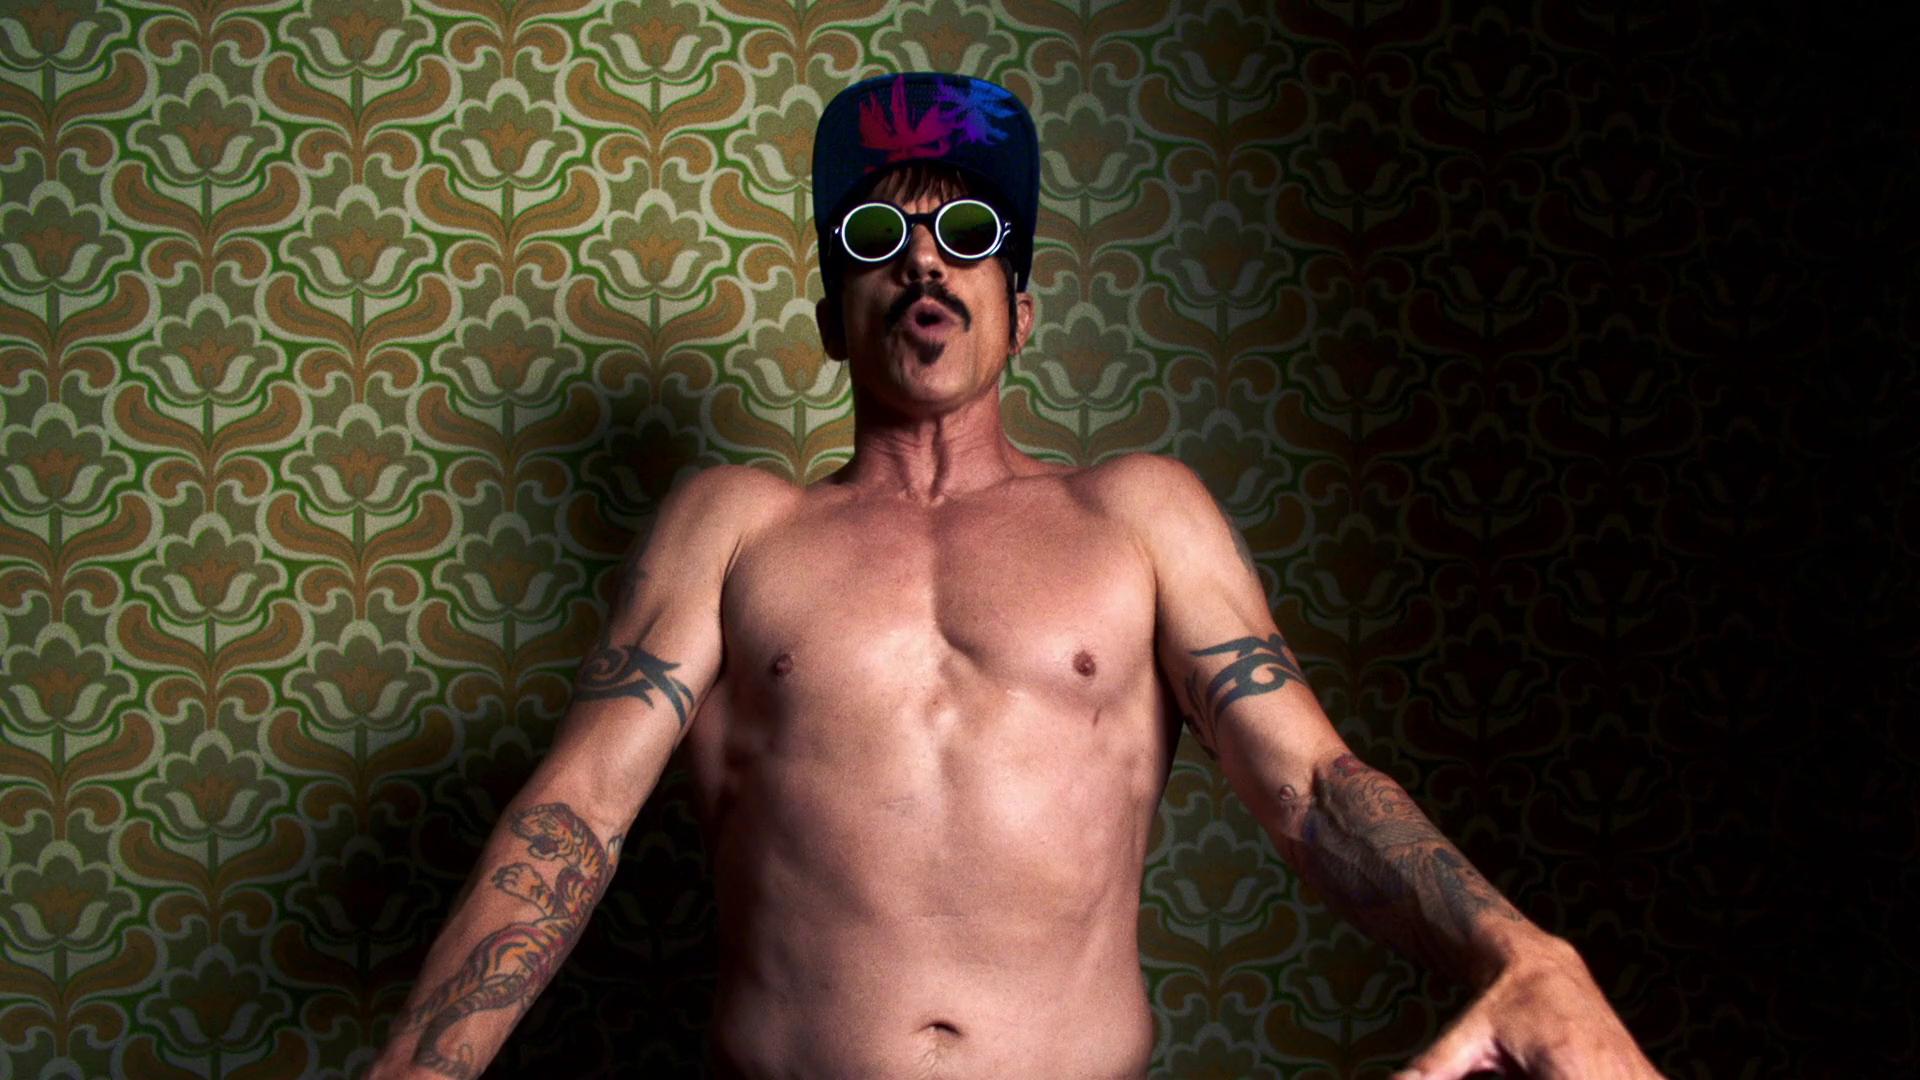 Red Hot Chili Peppers Music Video.